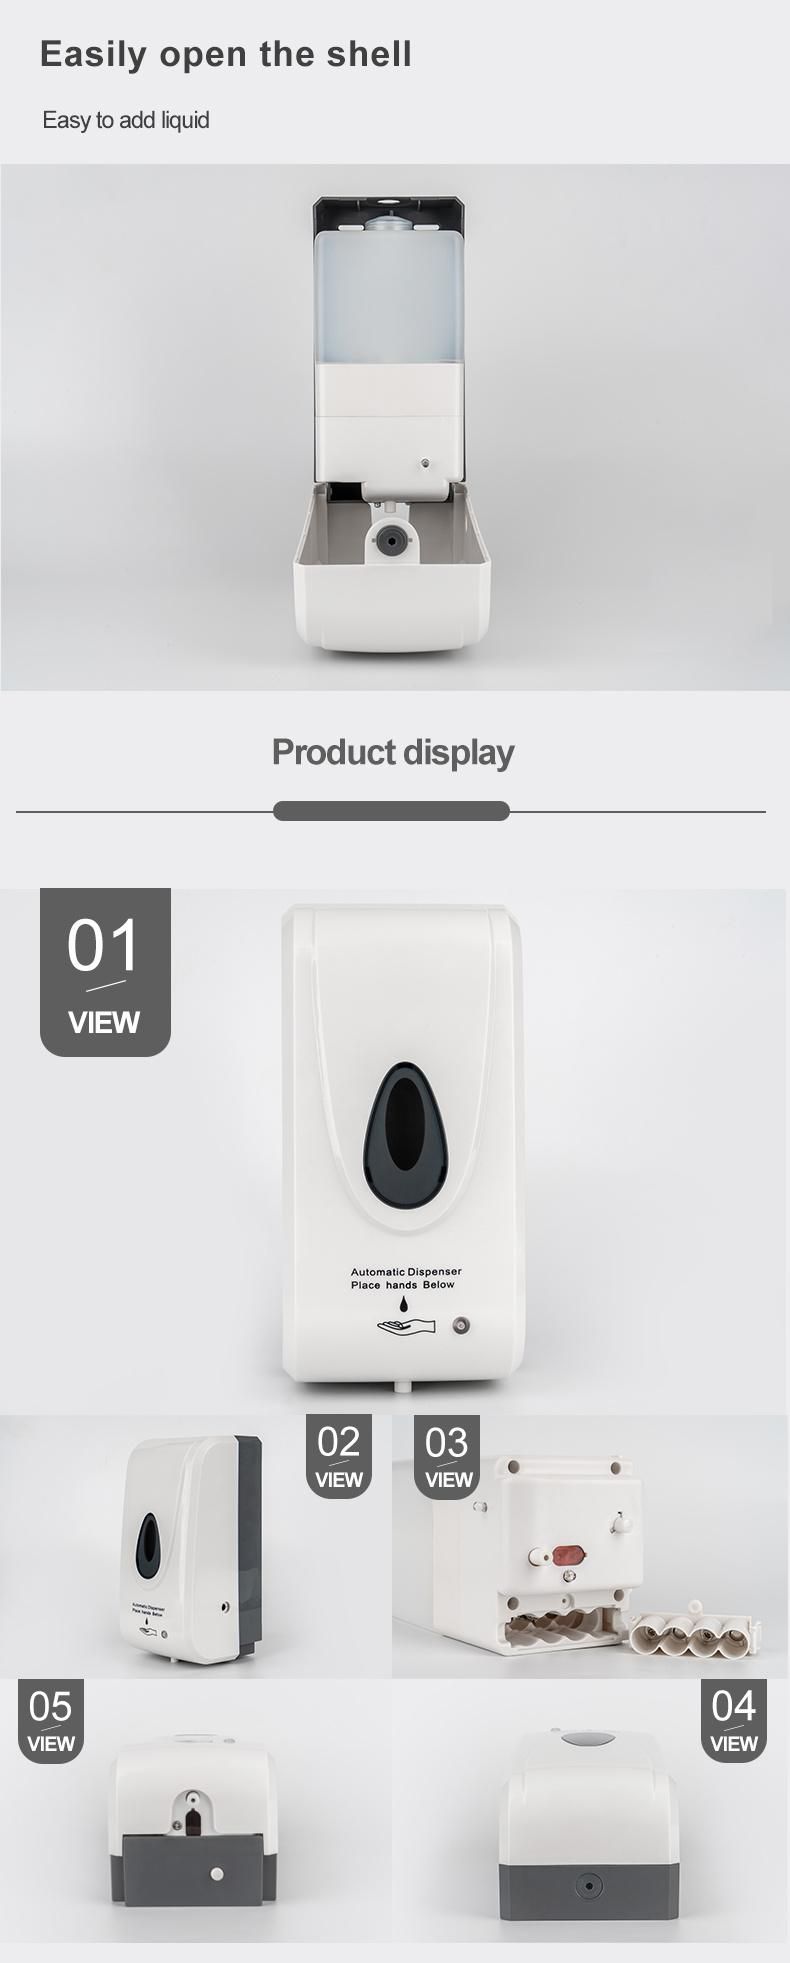 Saige 1000ml Wall Mounted Touch Free Hand Sanitizer Dispenser Automatic Liquid Soap Dispenser